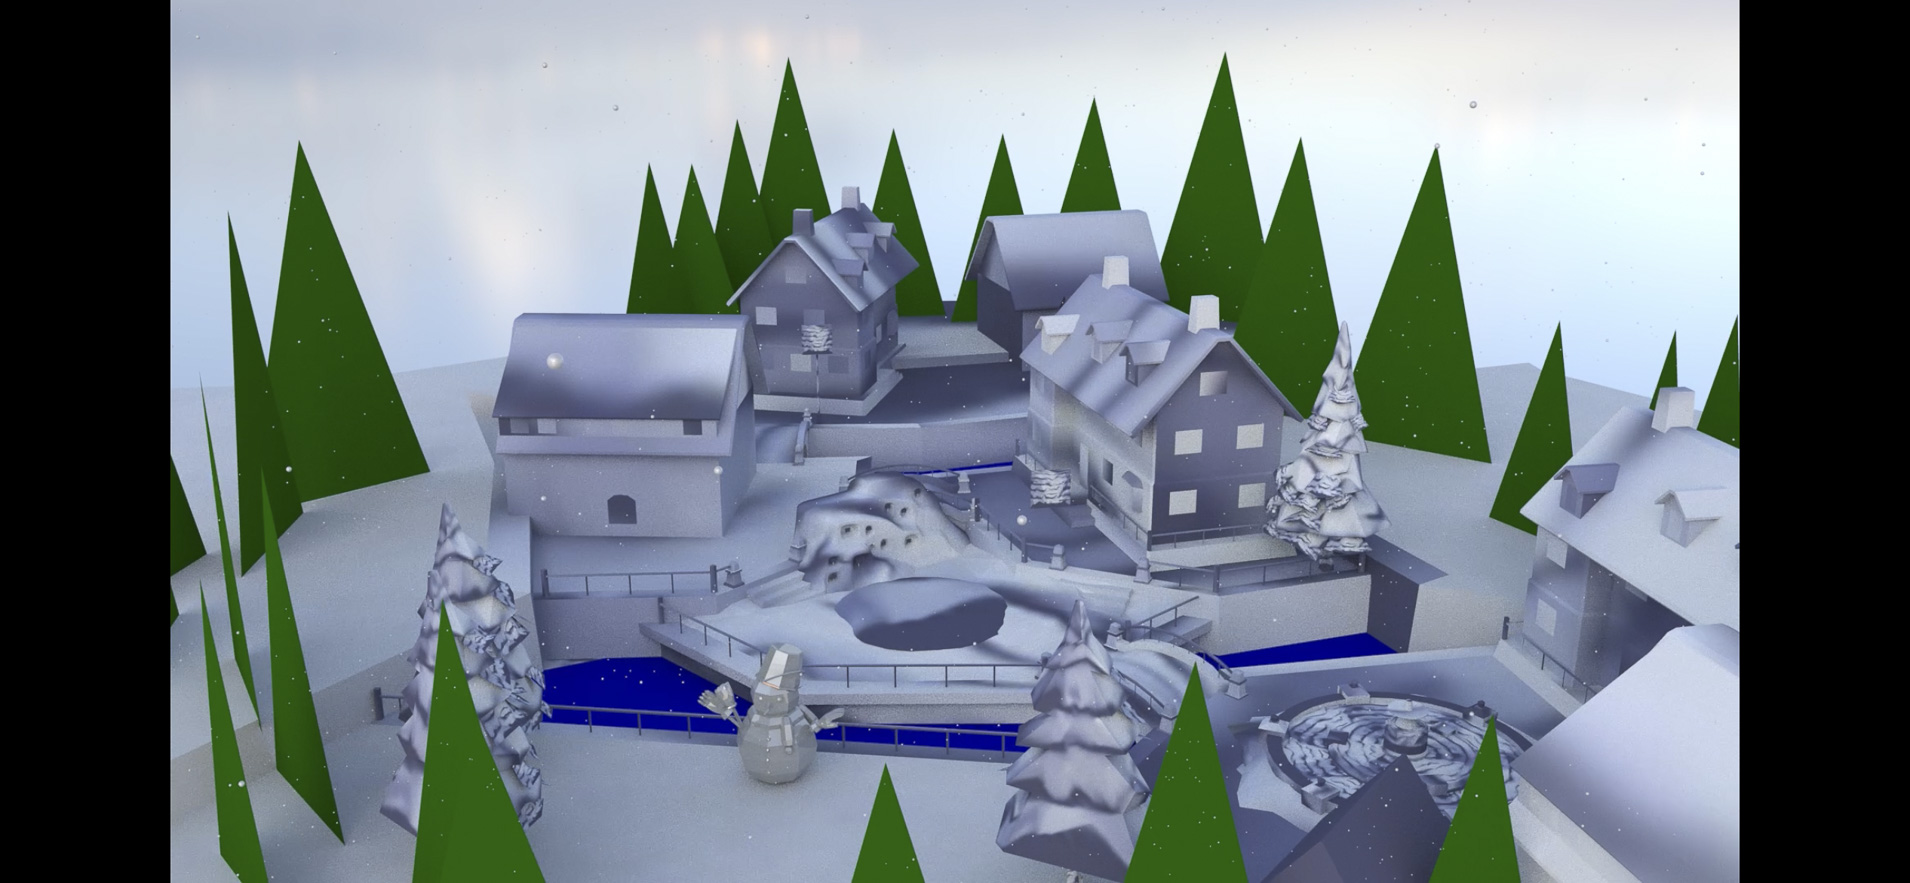 Still from a digital animation showing a winter time scene